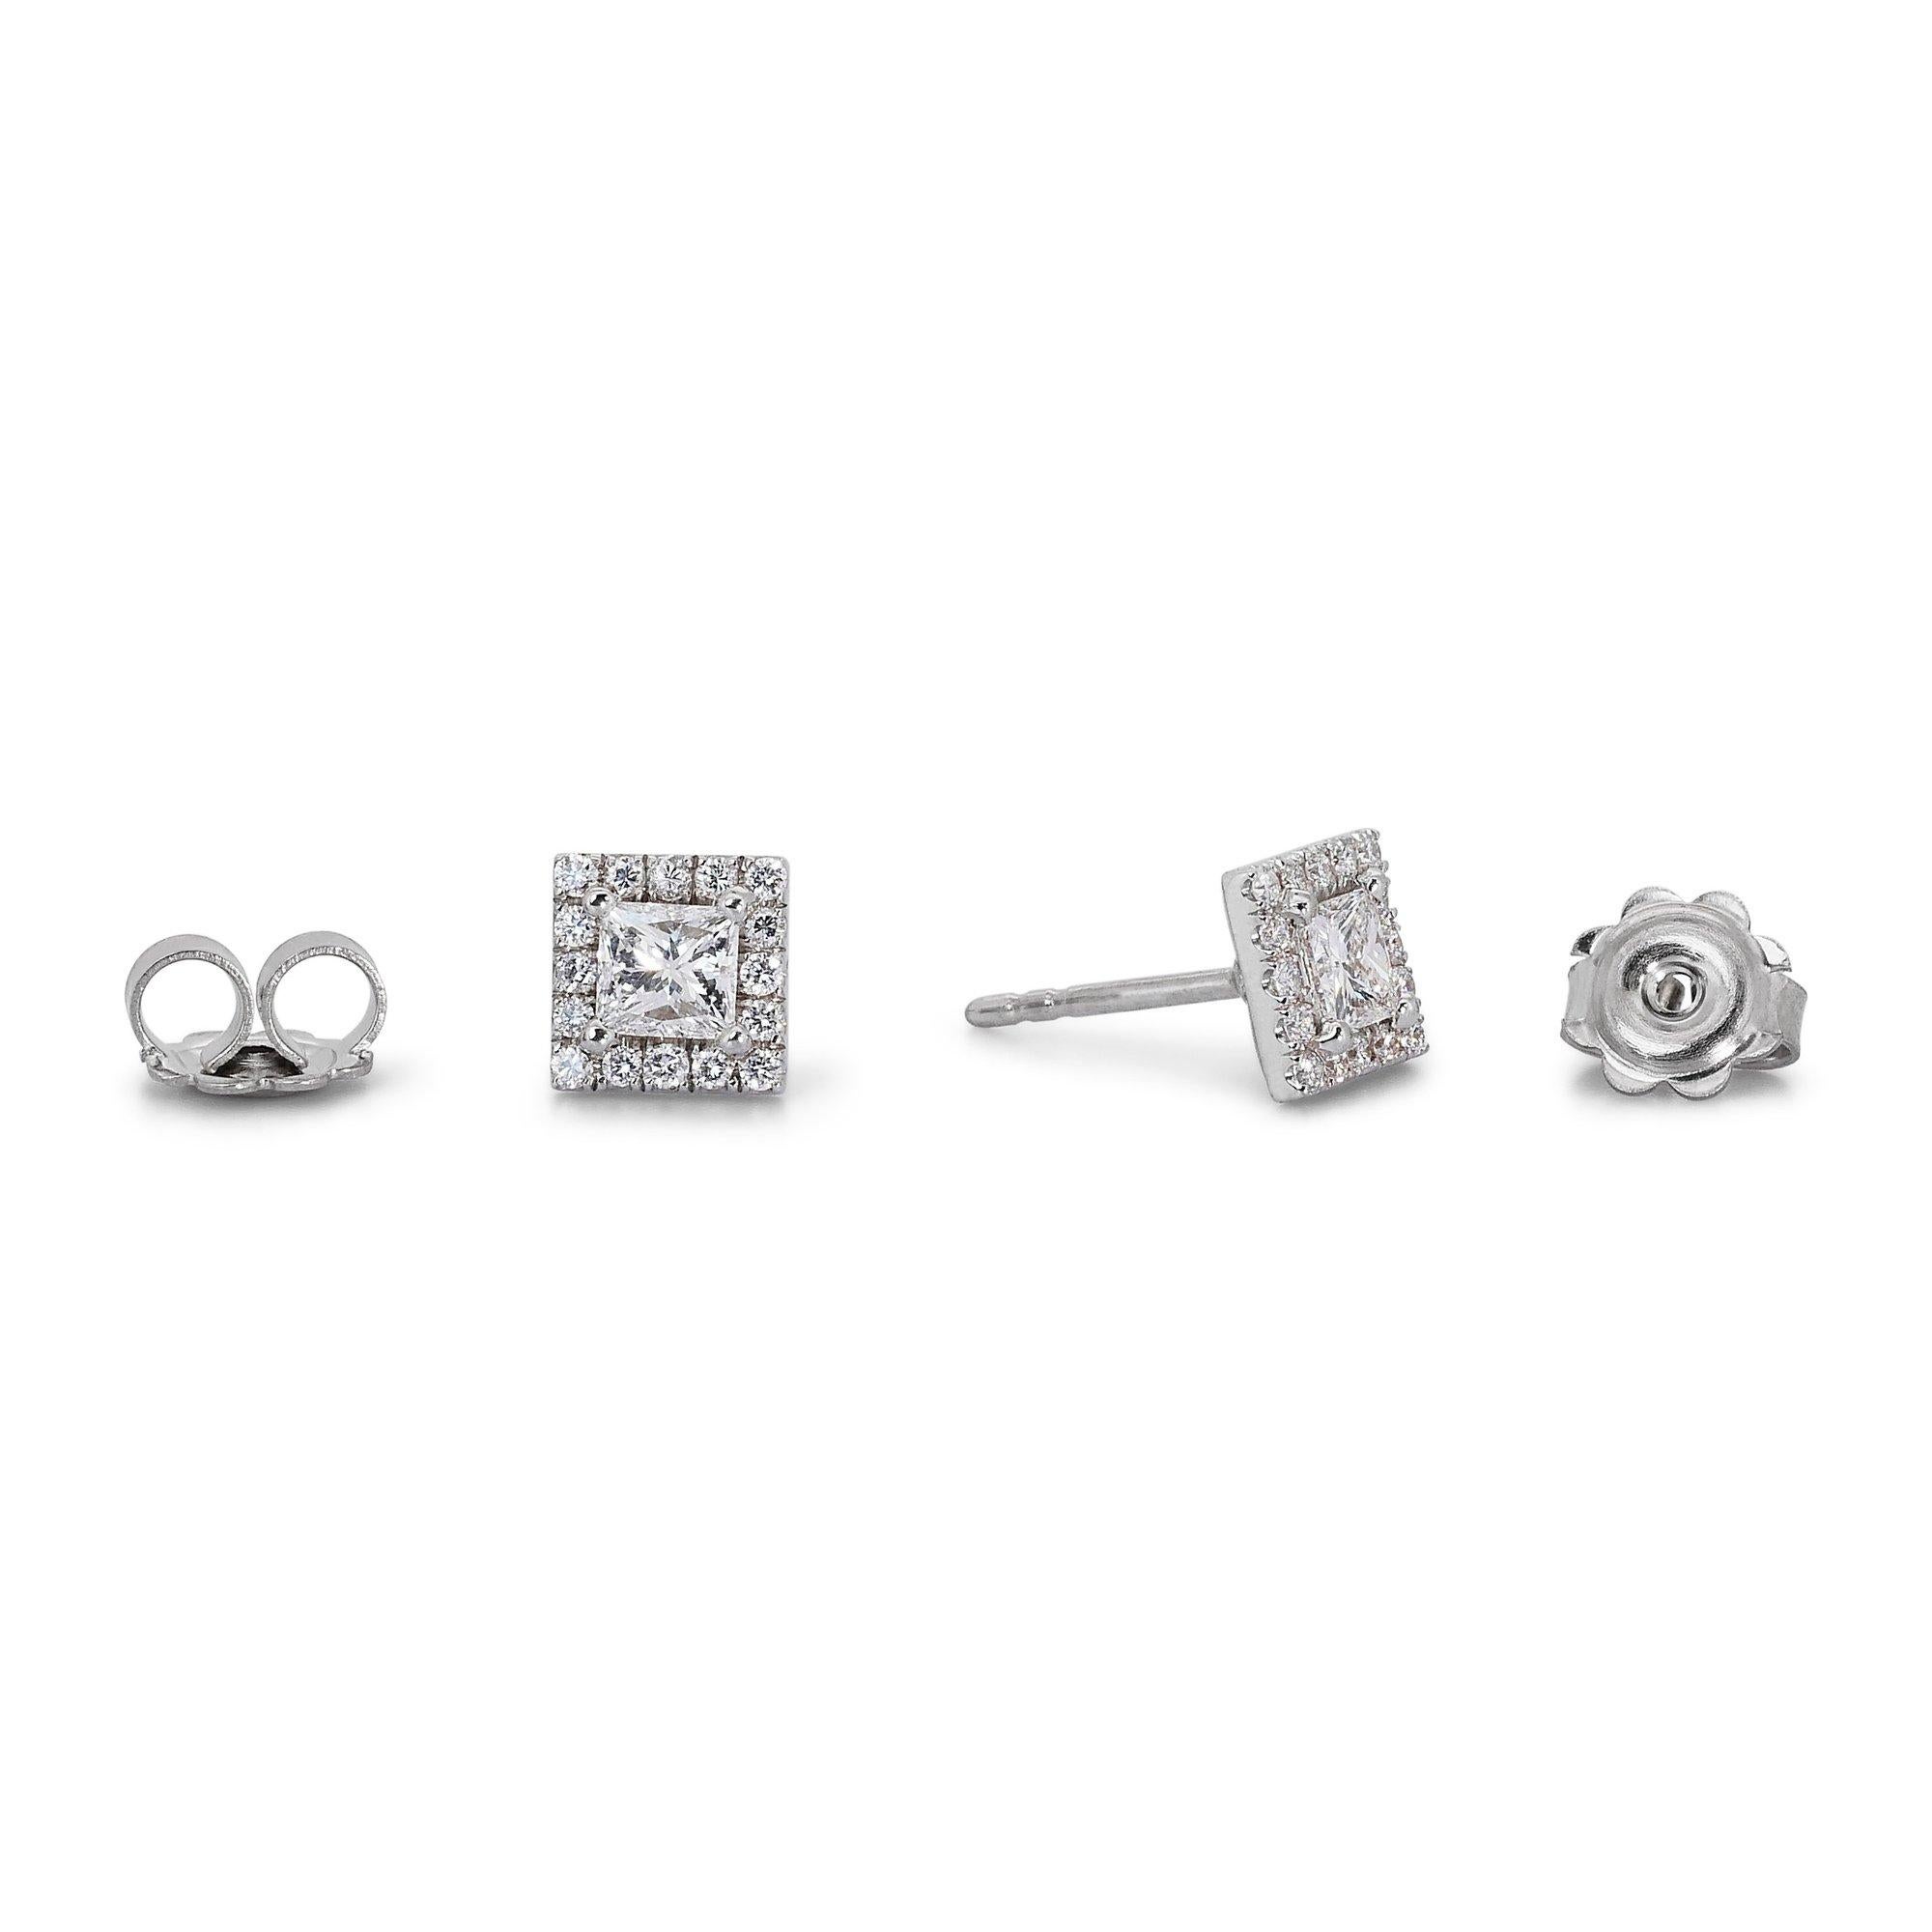 Enchanting 1.33ct Diamond Halo Stud Earrings in 18k White Gold - GIA Certified  For Sale 3